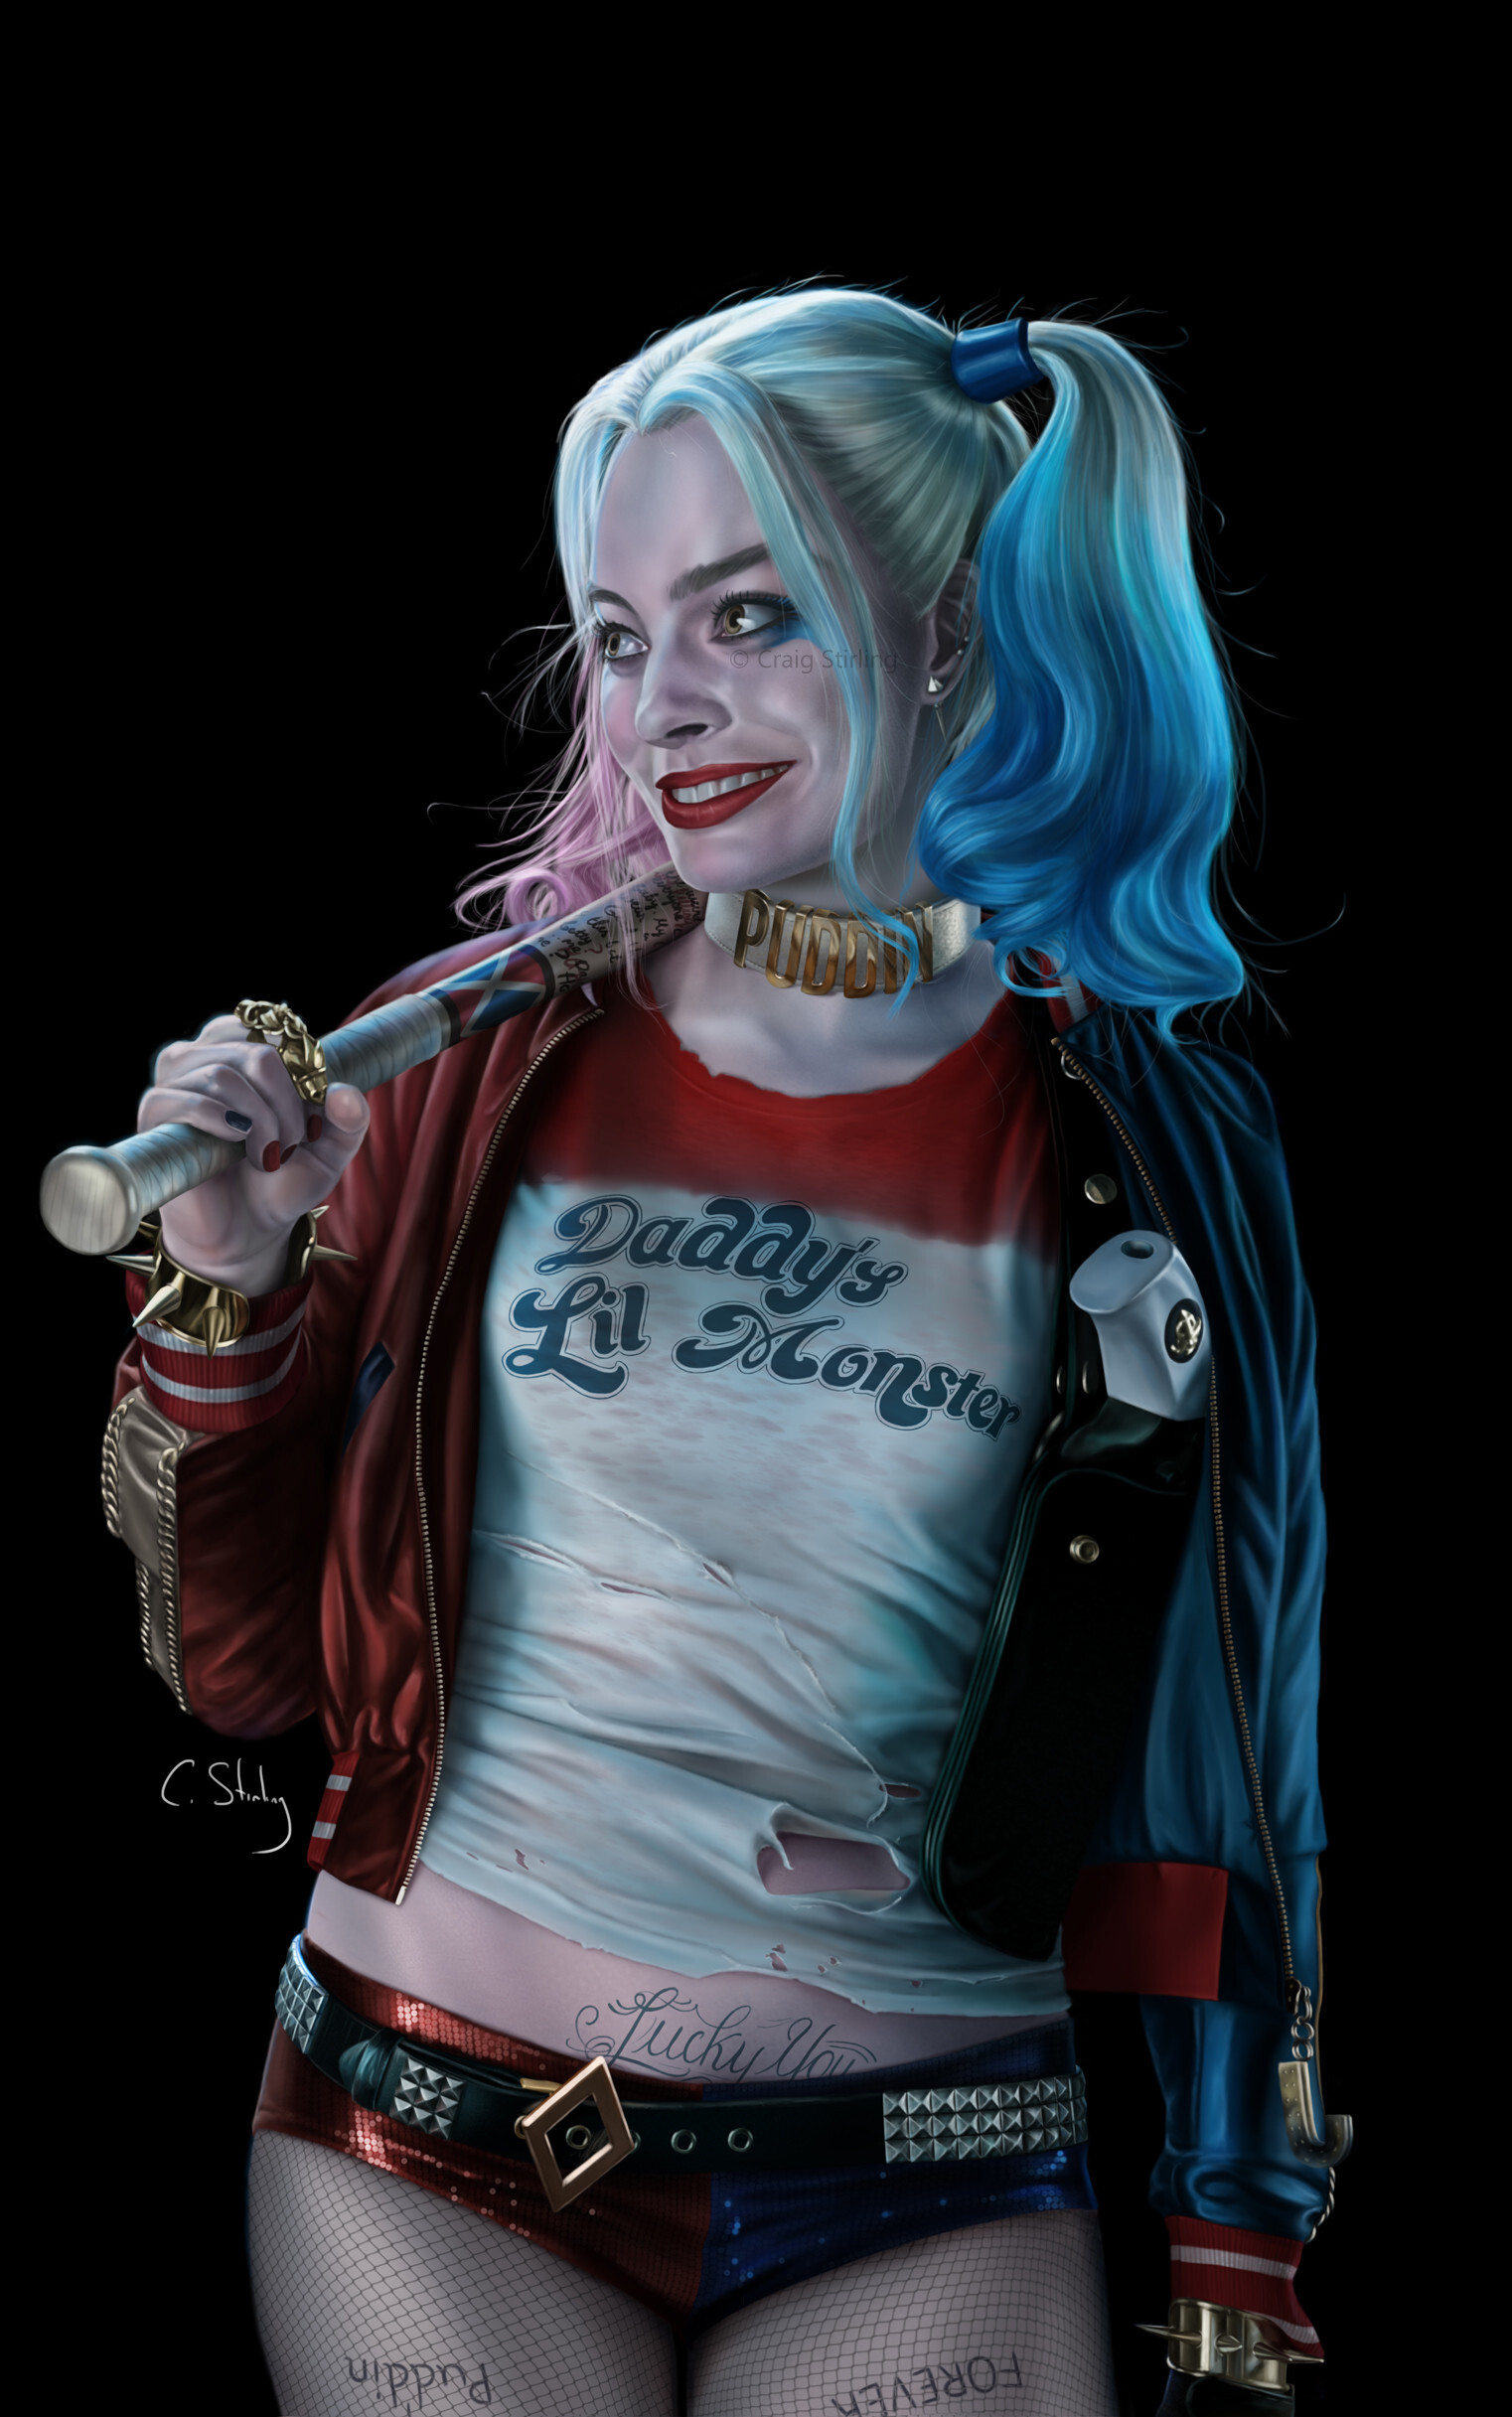 General 1522x2433 Harley Quinn Margot Robbie Suicide Squad women brown eyes white hair digital art dyed hair white shirt torn clothes baseball bat makeup tattoo black background pink hair blue hair celebrity portrait display fan art red blue colored nails jewelry